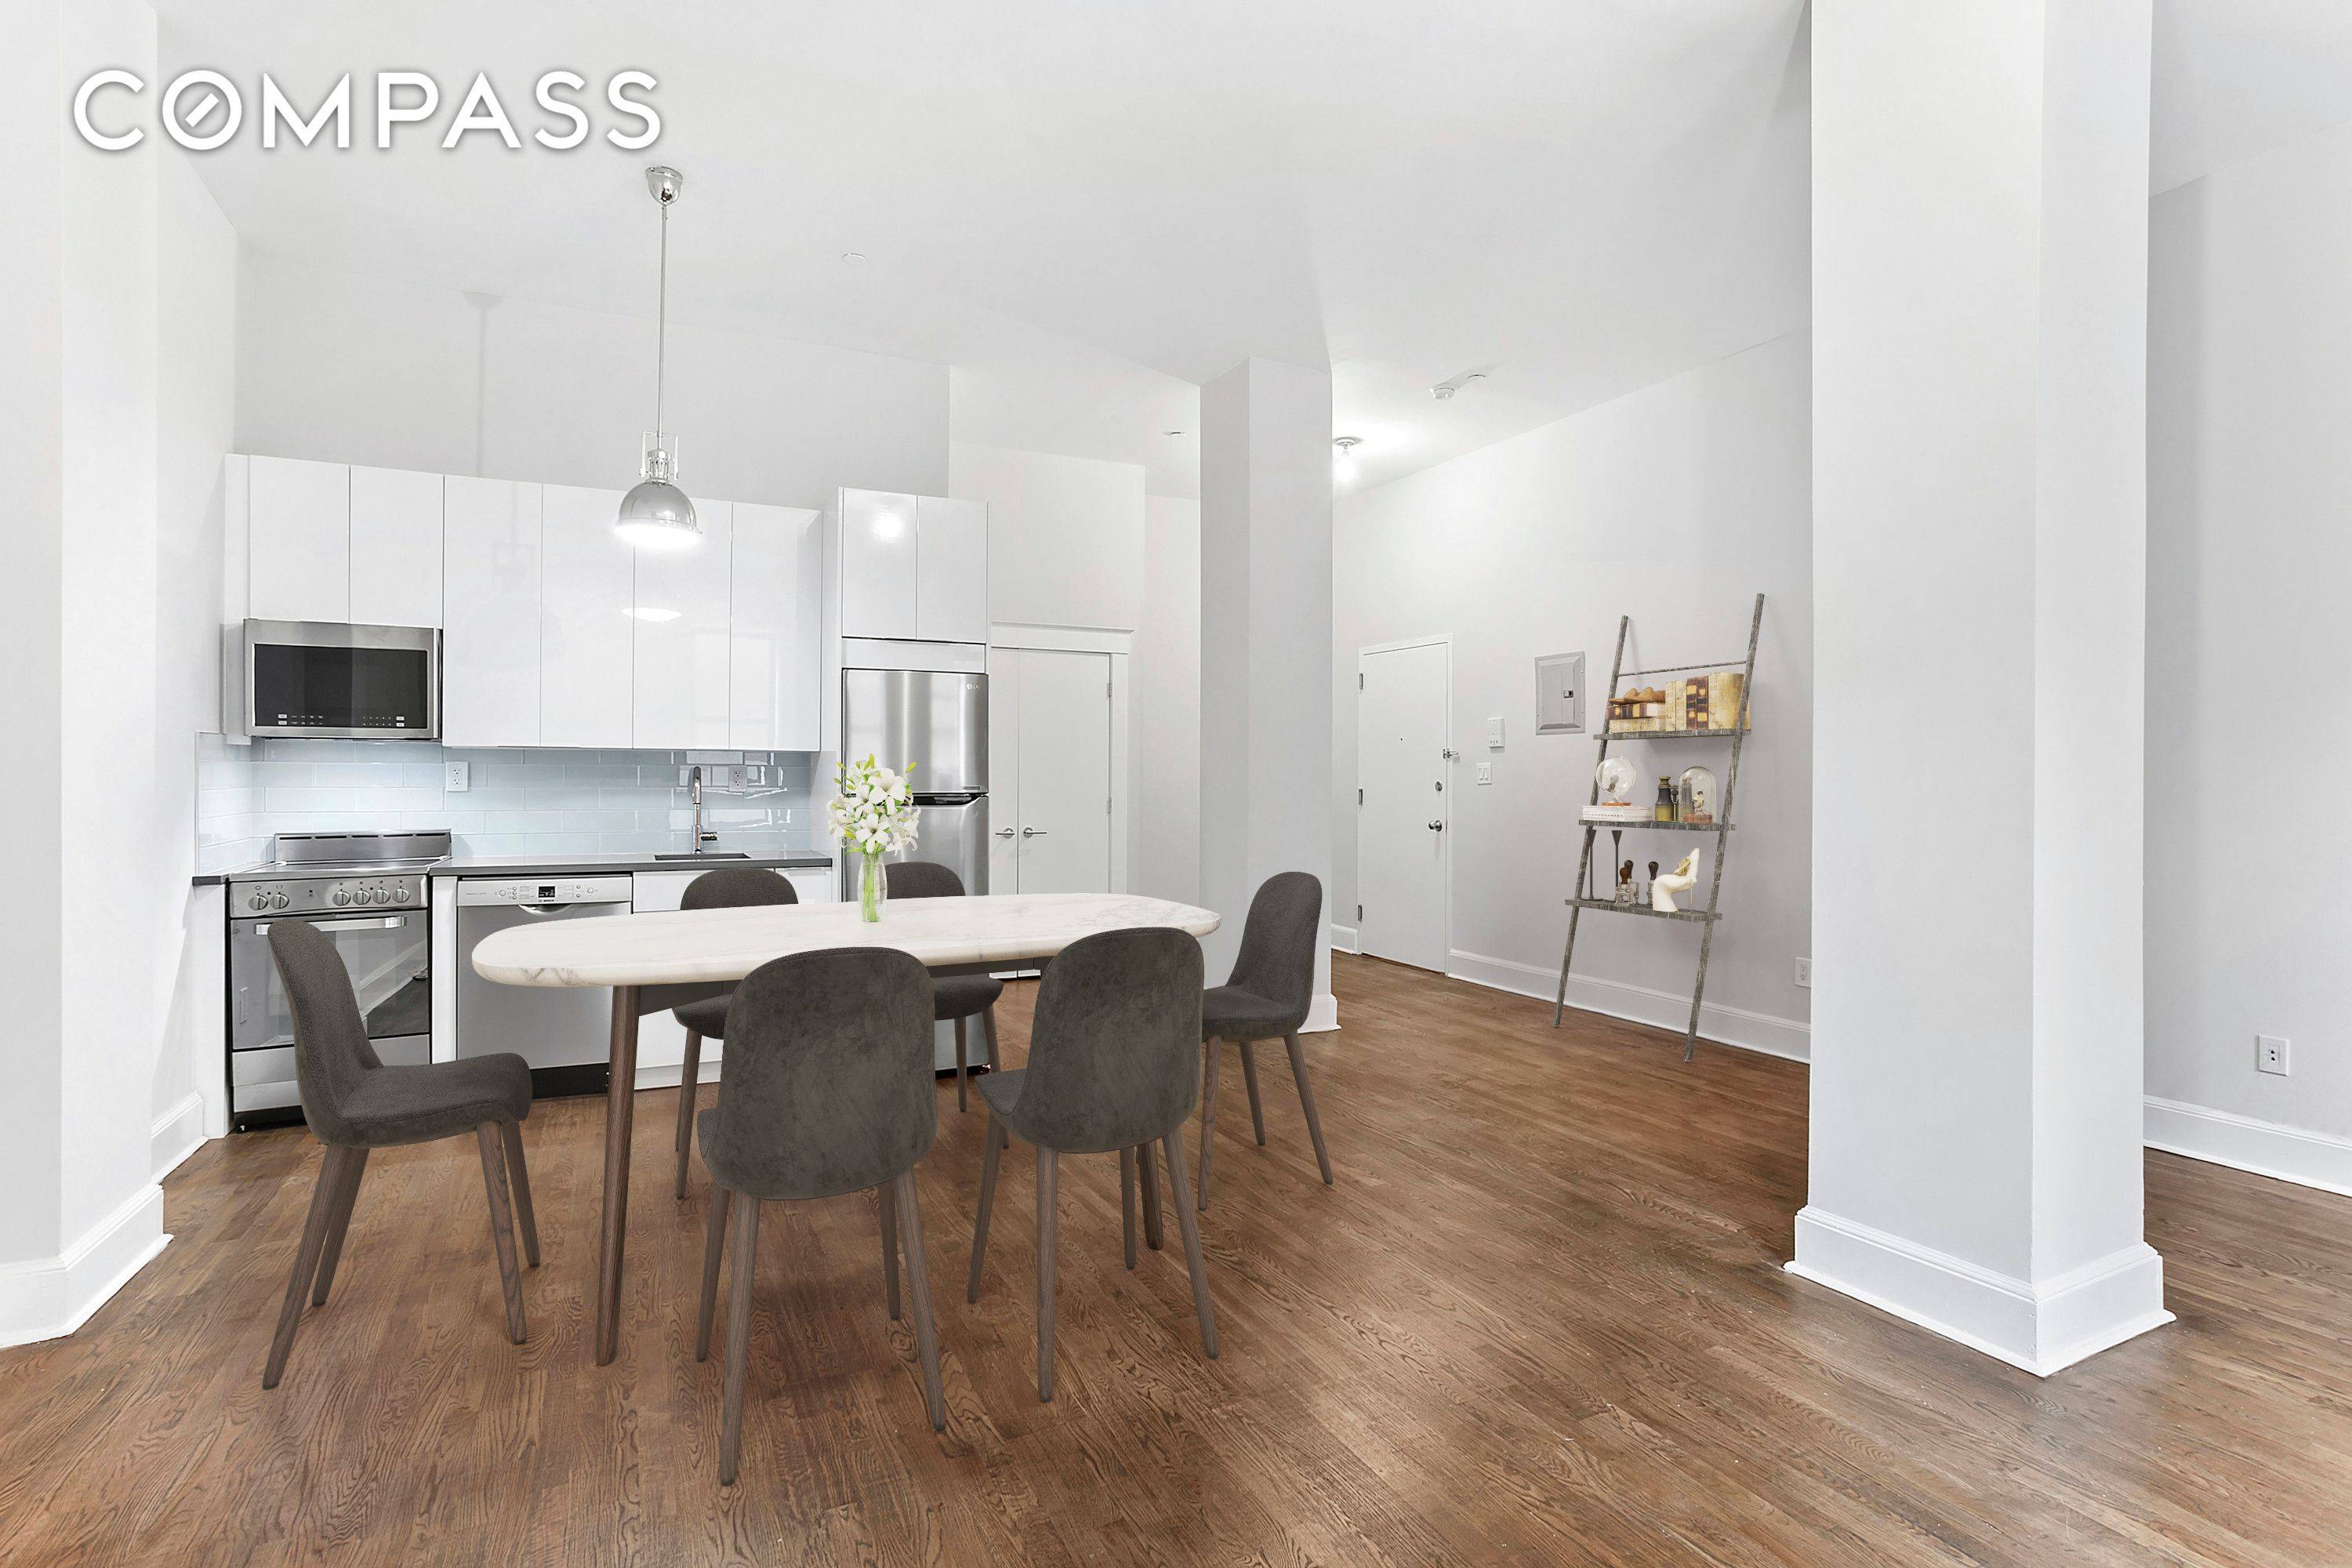 Williamsburg Duplex Stunning Gut Renovated Convertible 2BD Duplex plus home office with Stainless Steel Kitchen Package, Large Living Area, Updated Bath, all in a Pet Friendly Elevator Building with Laundry ...